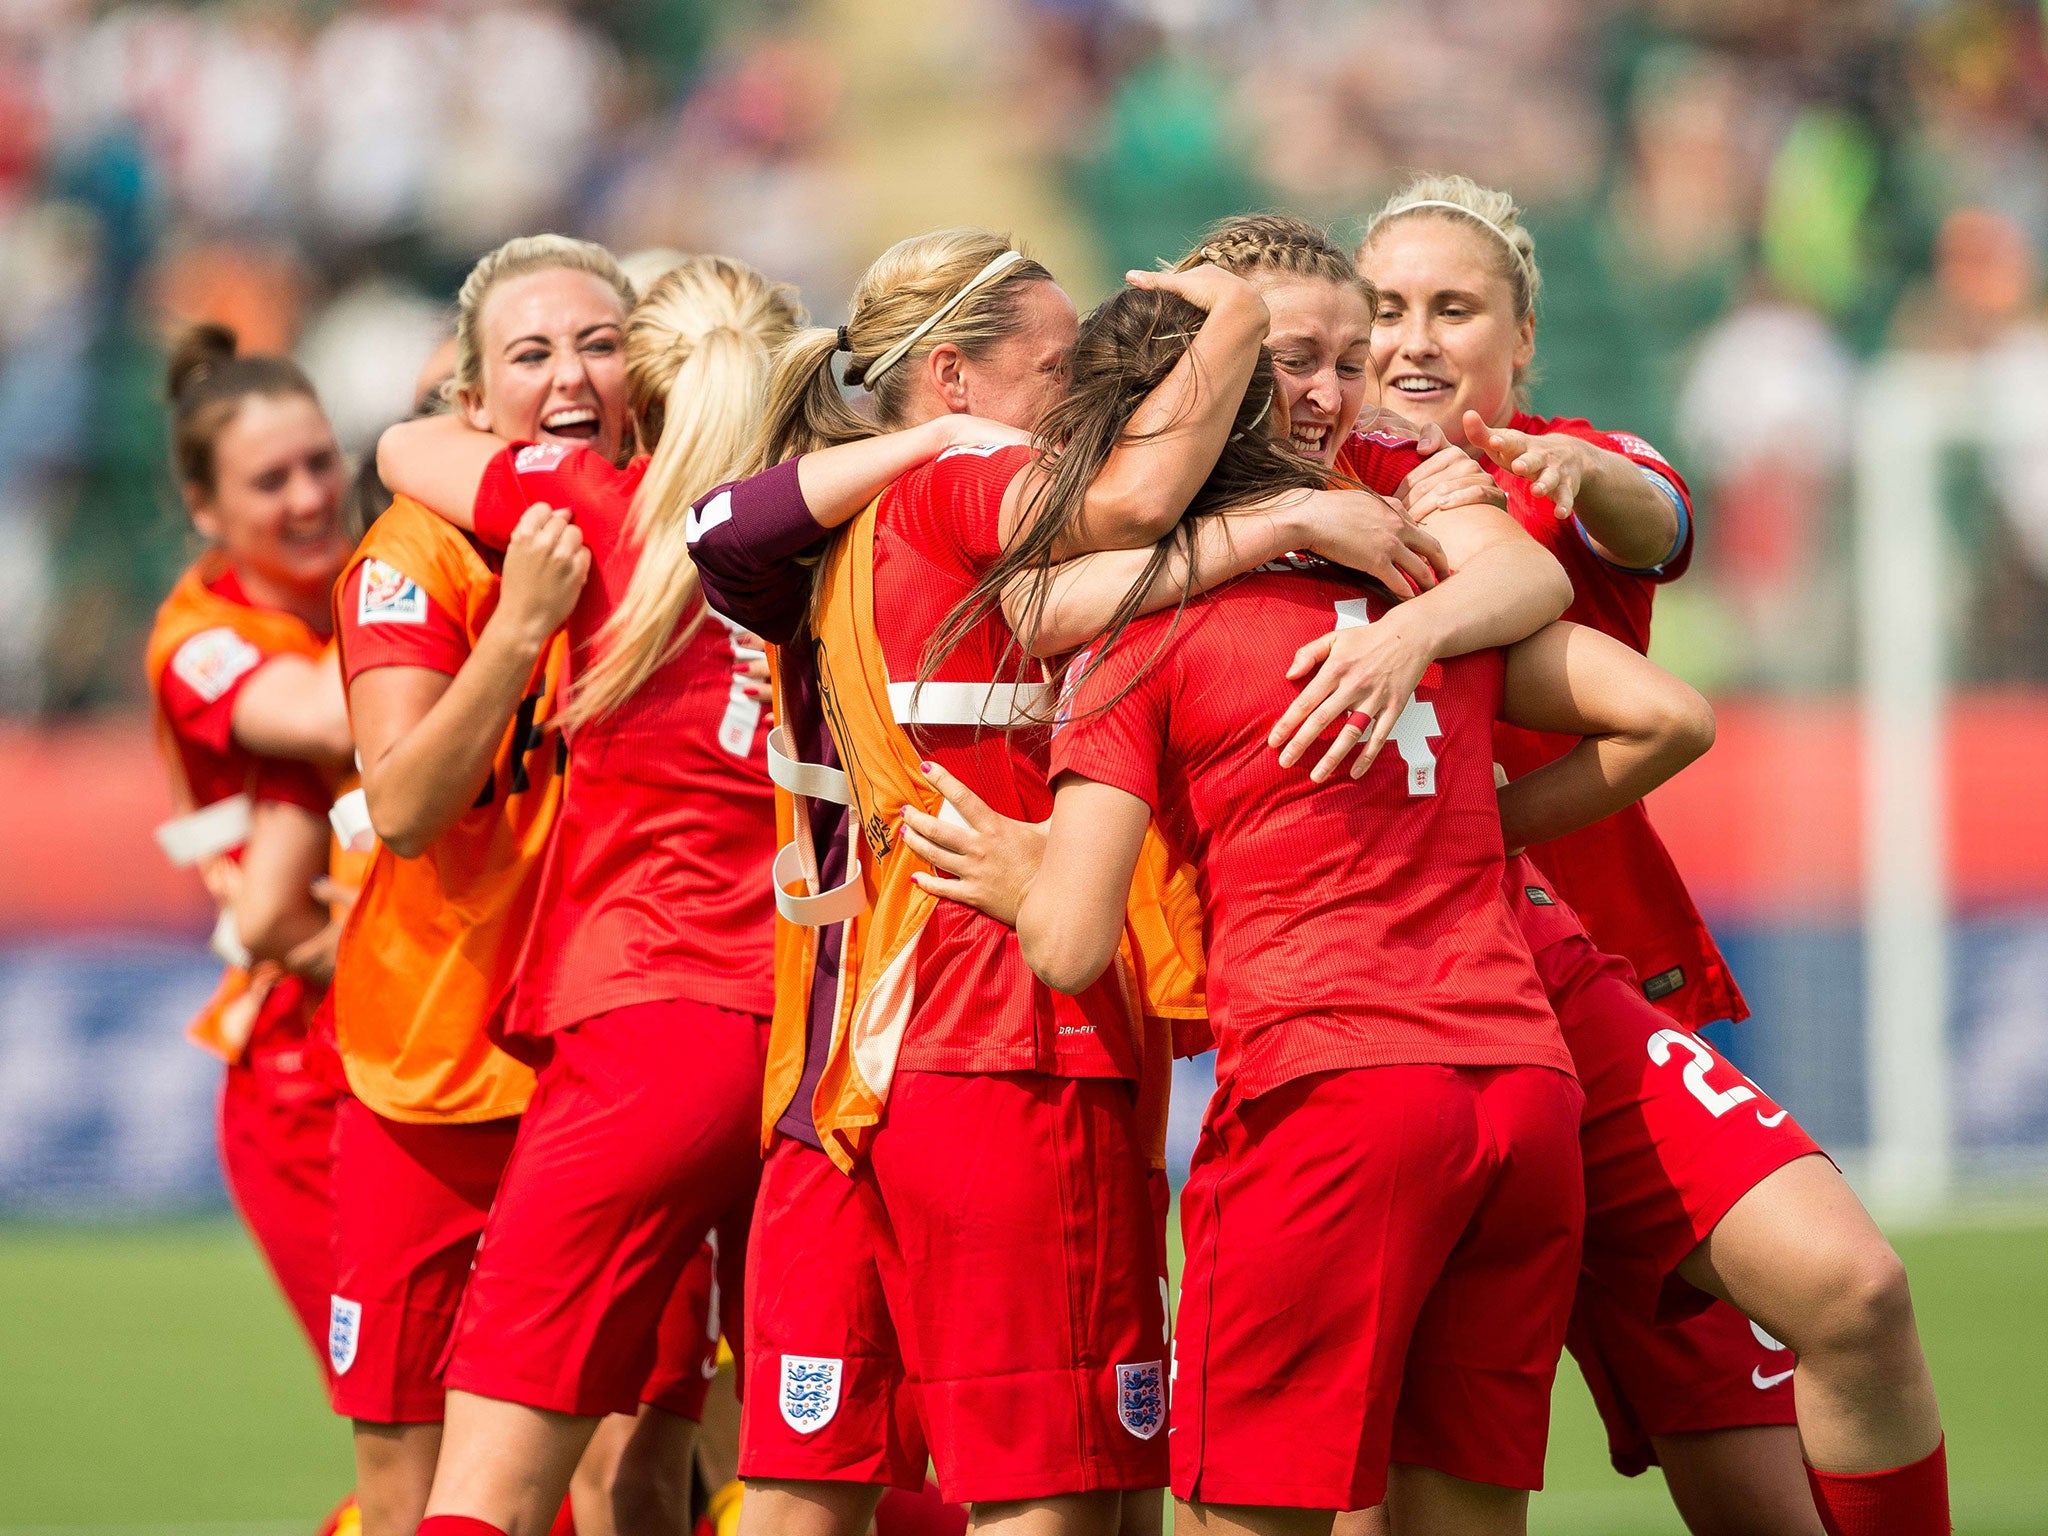 England's players celebrate Fara Williams' goal during extra time of their bronze medal match against Germany at the FIFA Women's World Cup in Edmonton, Alberta